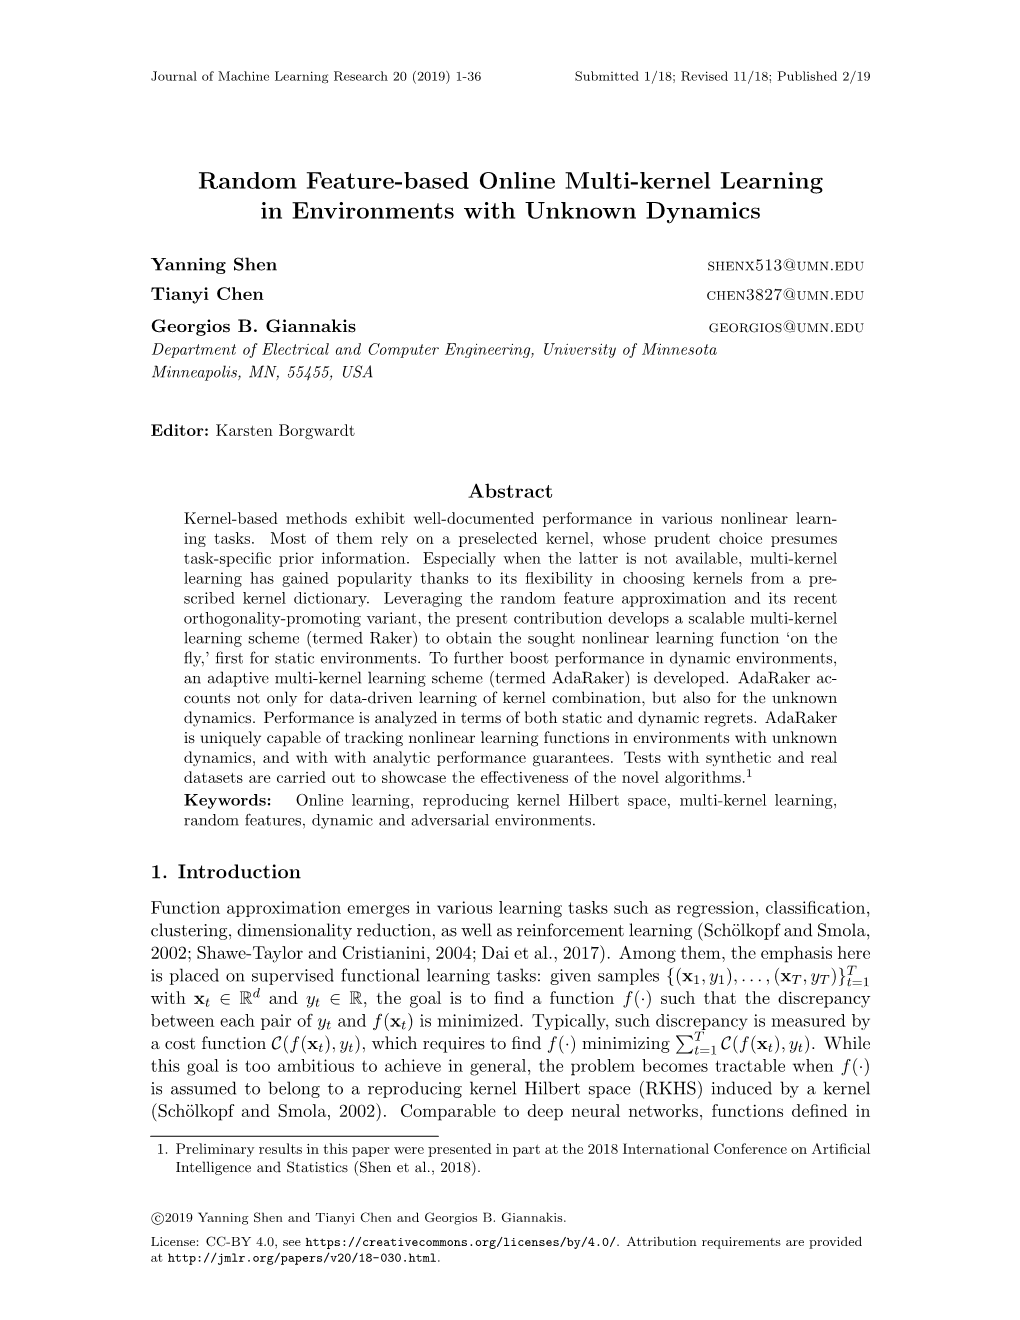 Random Feature-Based Online Multi-Kernel Learning in Environments with Unknown Dynamics